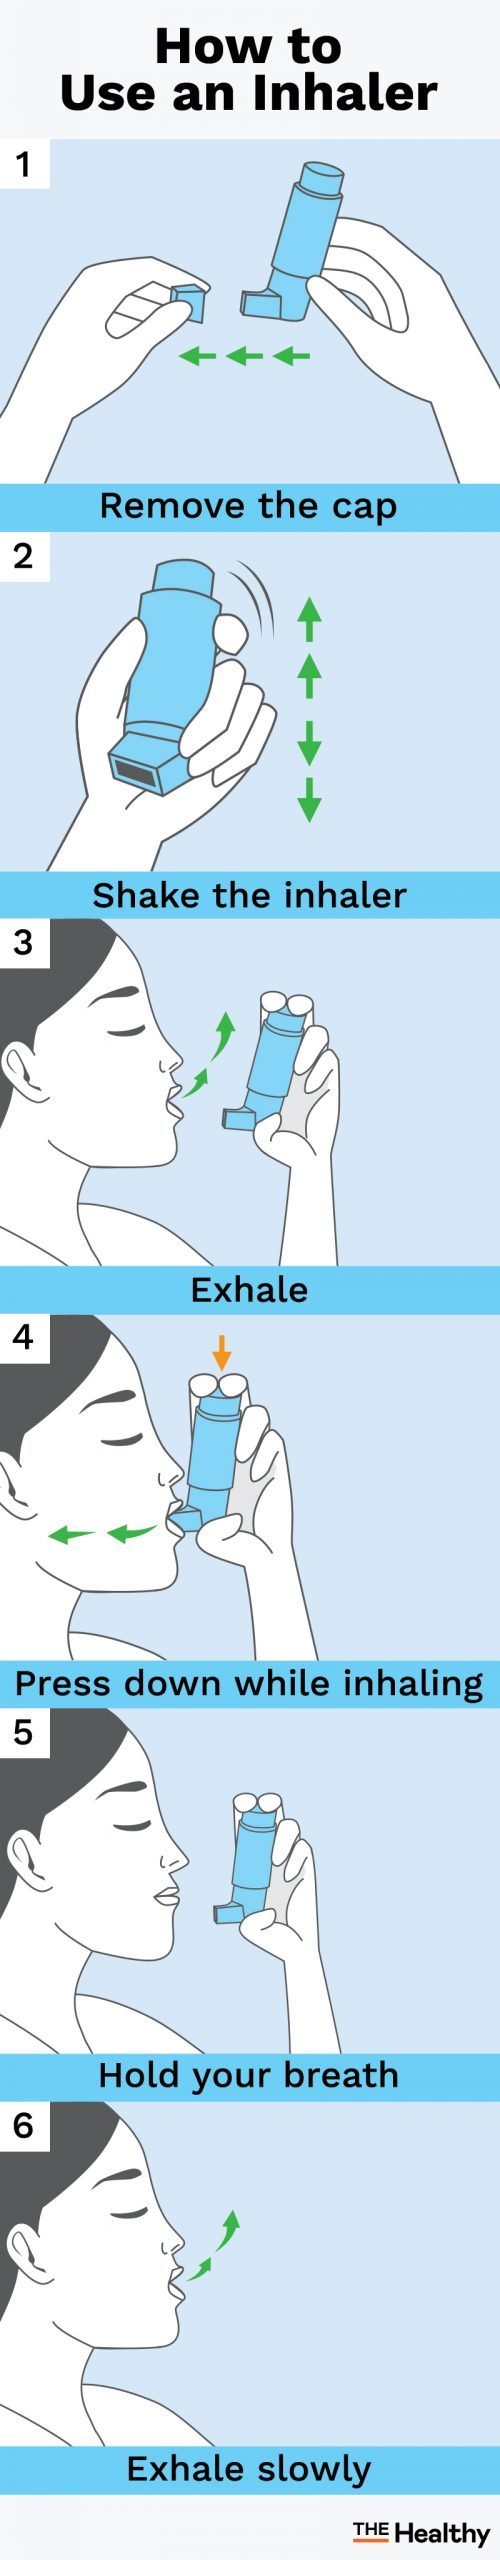 How To Use An Inhaler Infographic